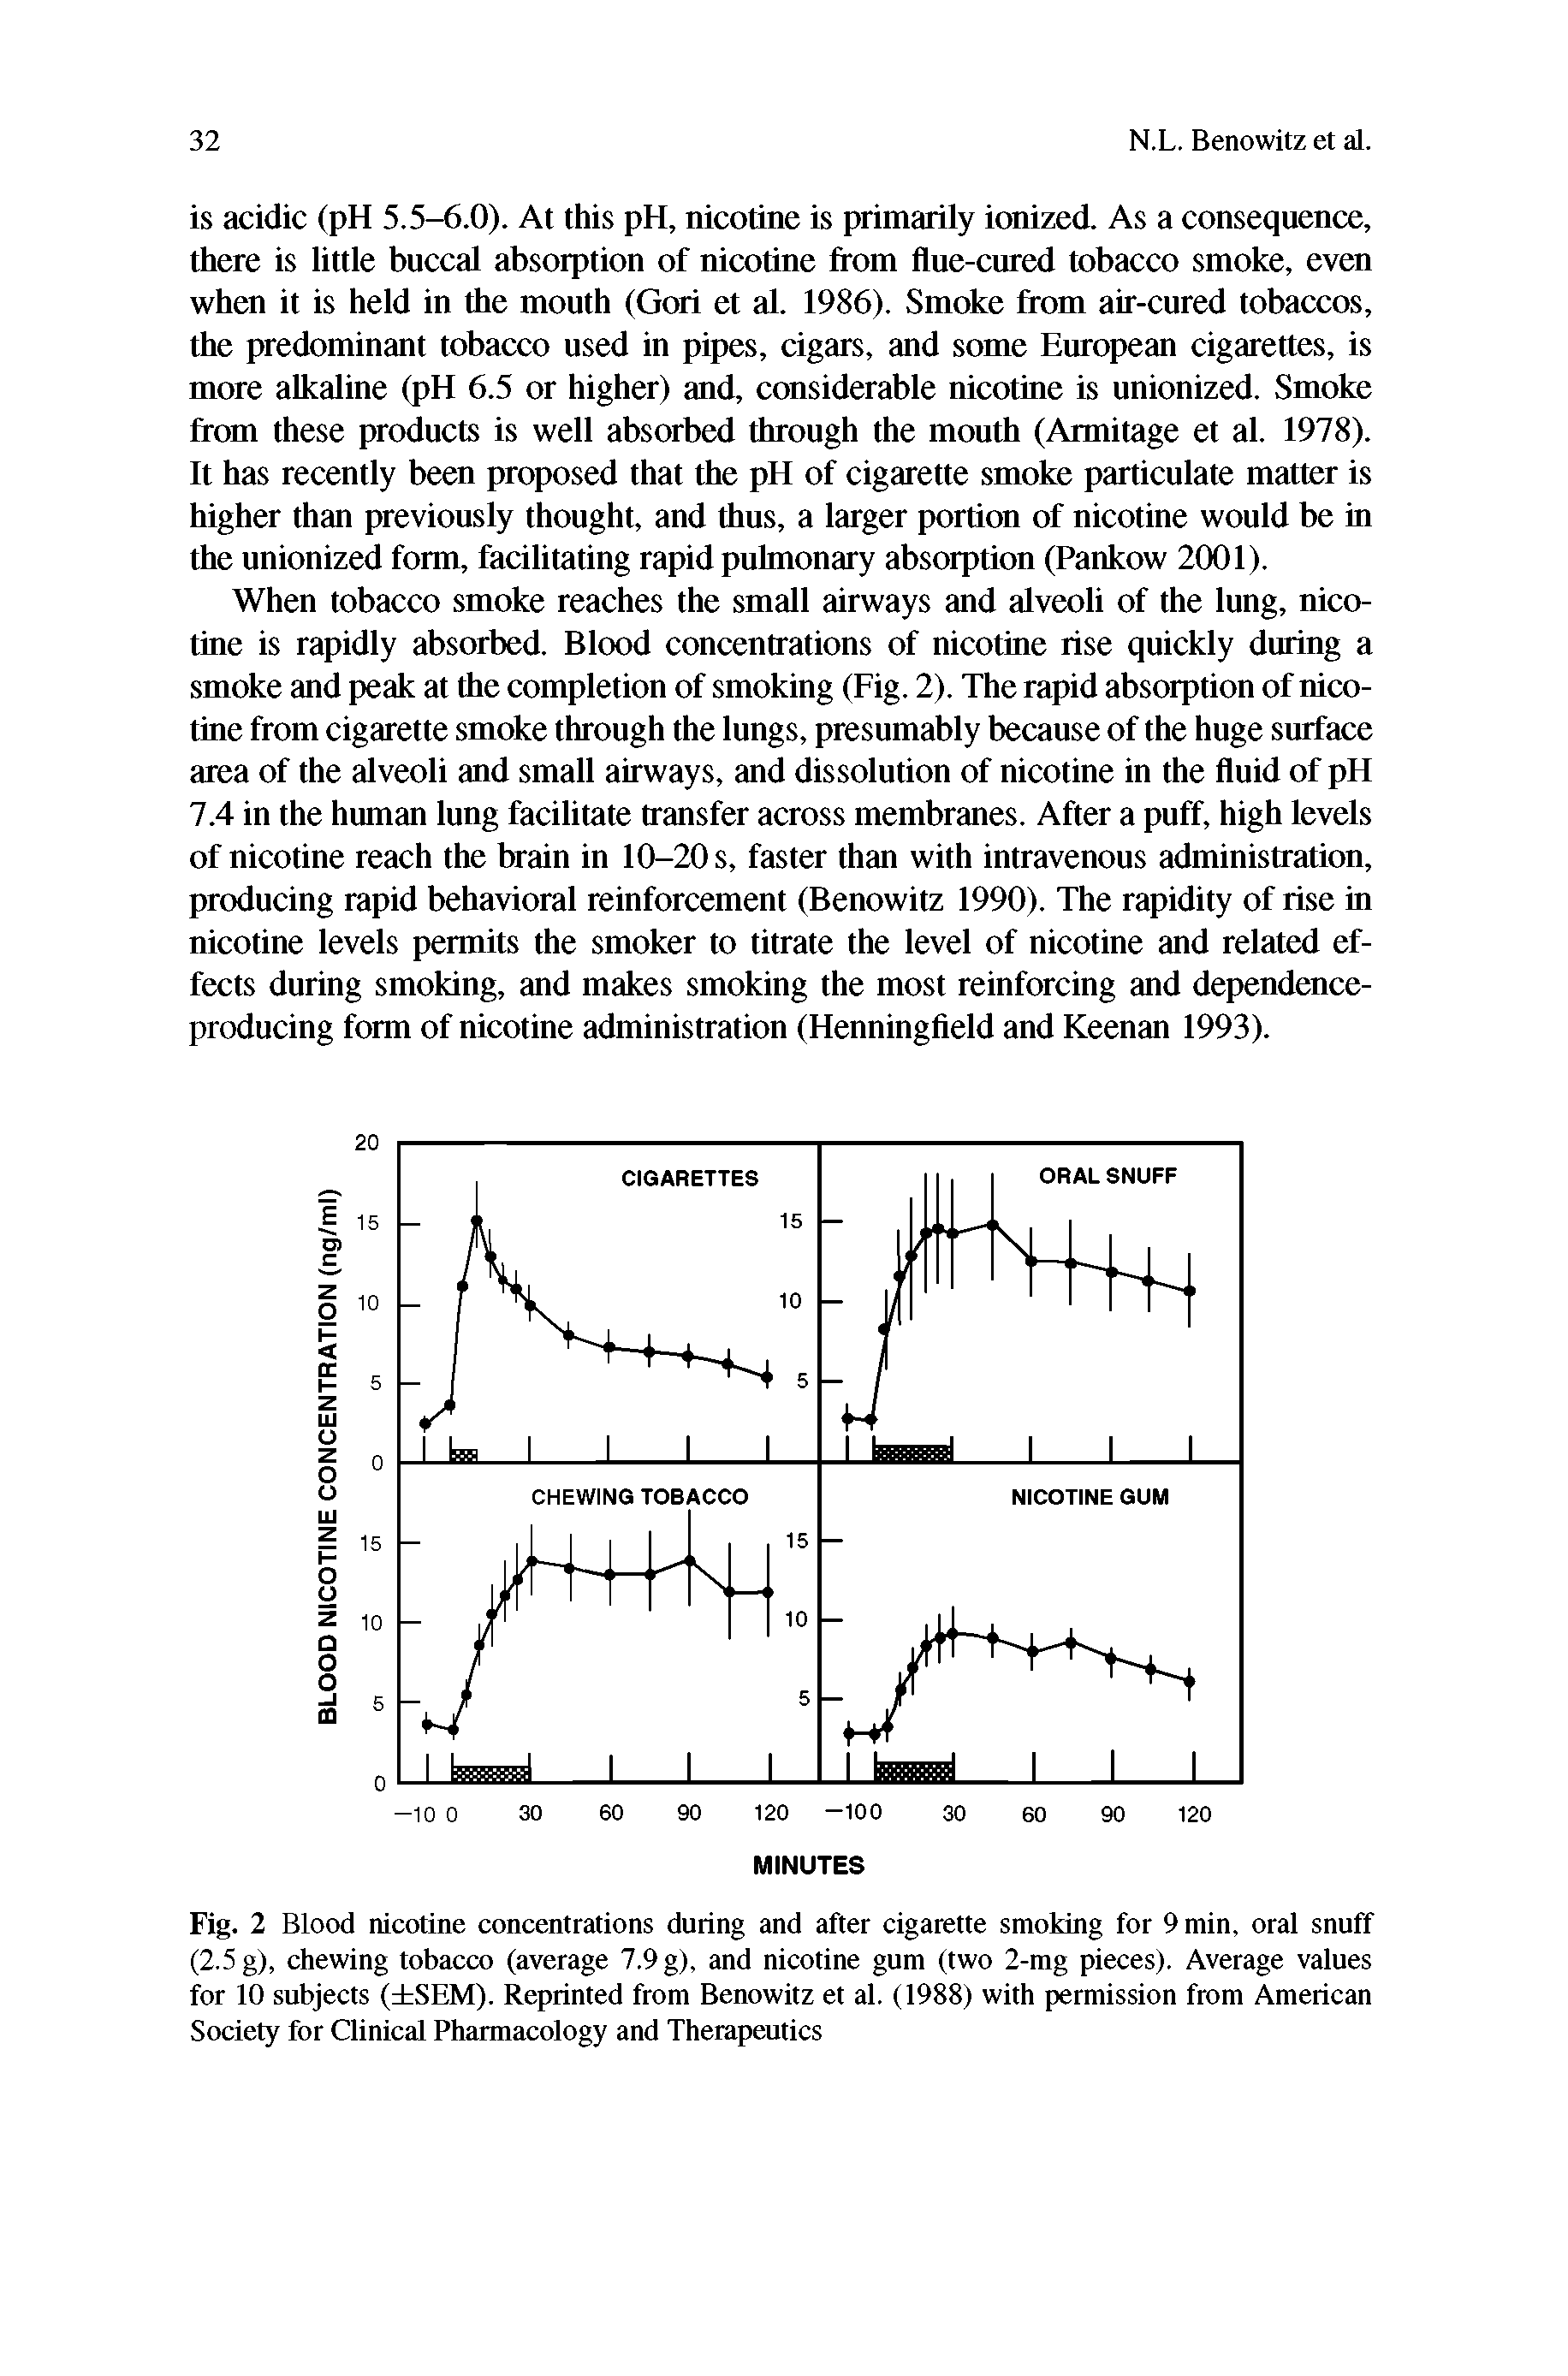 Fig. 2 Blood nicotine concentrations during and after cigarette smoking for 9 min, oral snuff (2.5 g), chewing tobacco (average 7.9 g), and nicotine gum (two 2-mg pieces). Average values for 10 subjects ( SEM). Reprinted from Benowitz et al. (1988) with permission from American Society for Clinical Pharmacology and Therapeutics...